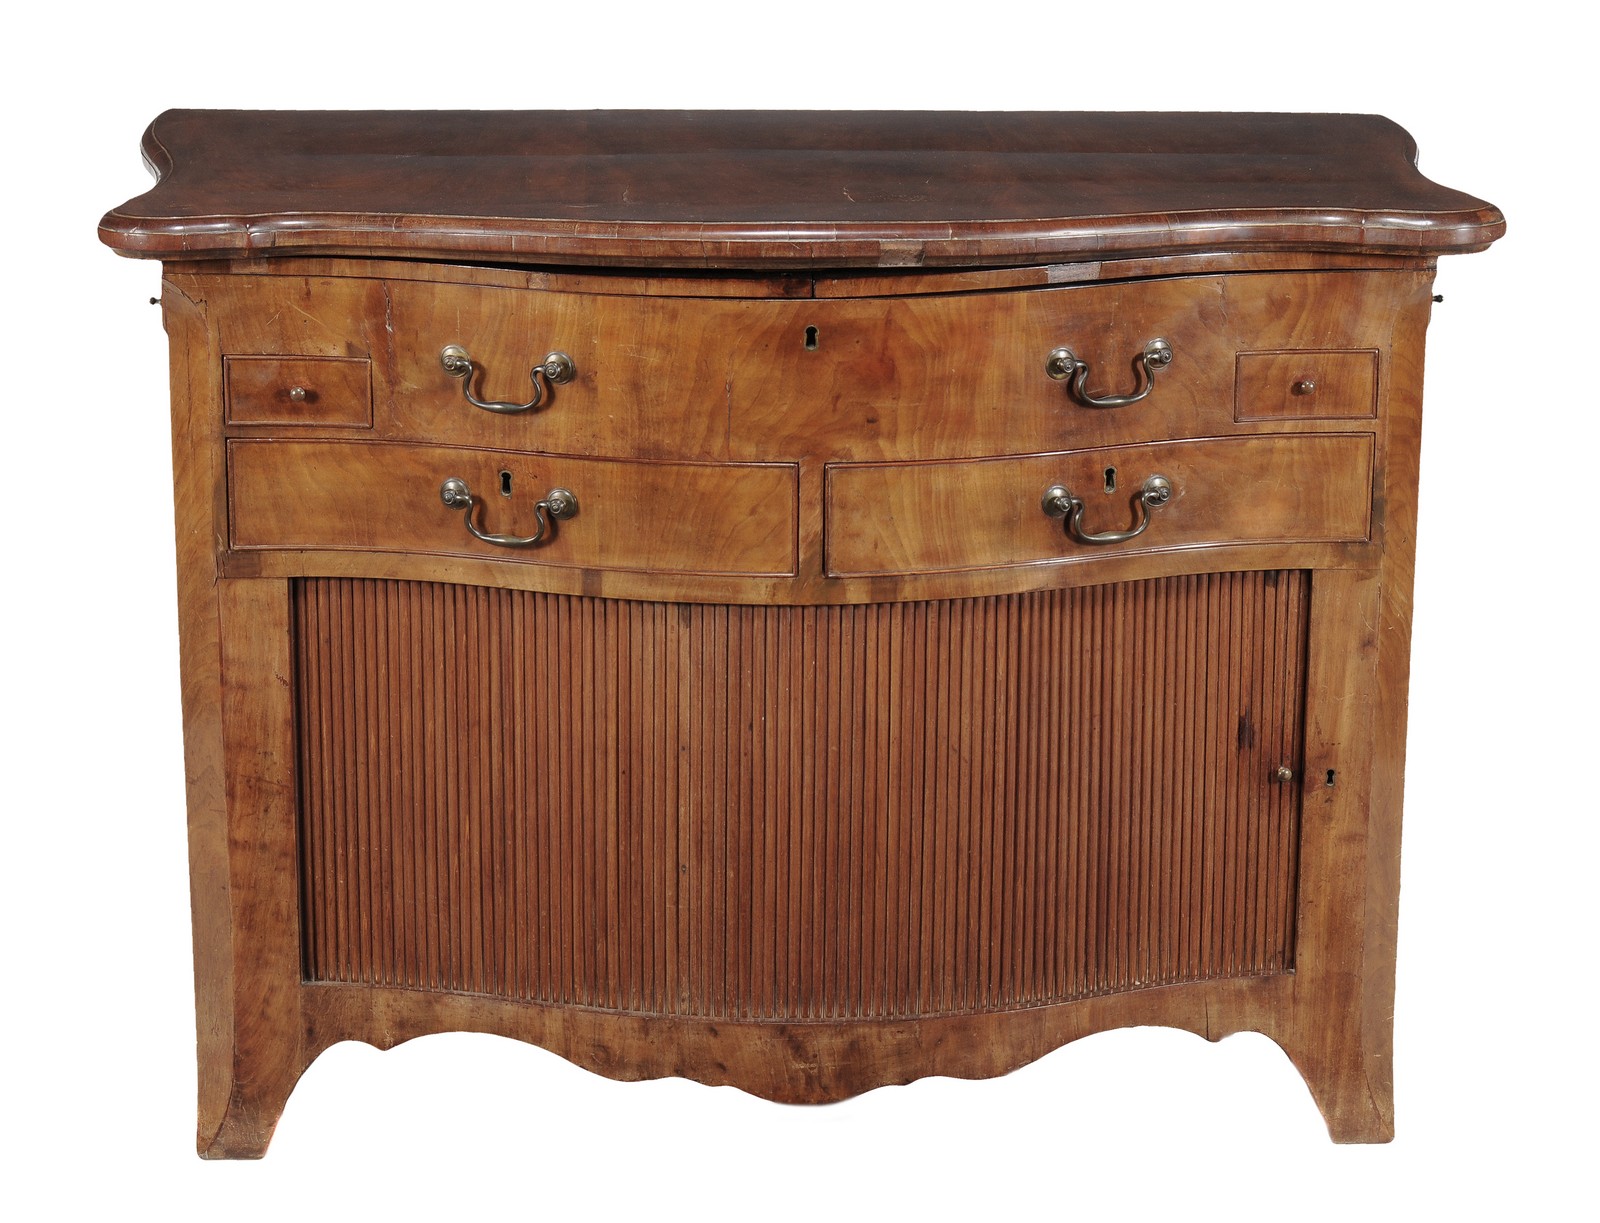 A Continental walnut serpentine fronted serving or dressing chest, late 18th/ early 19th century,